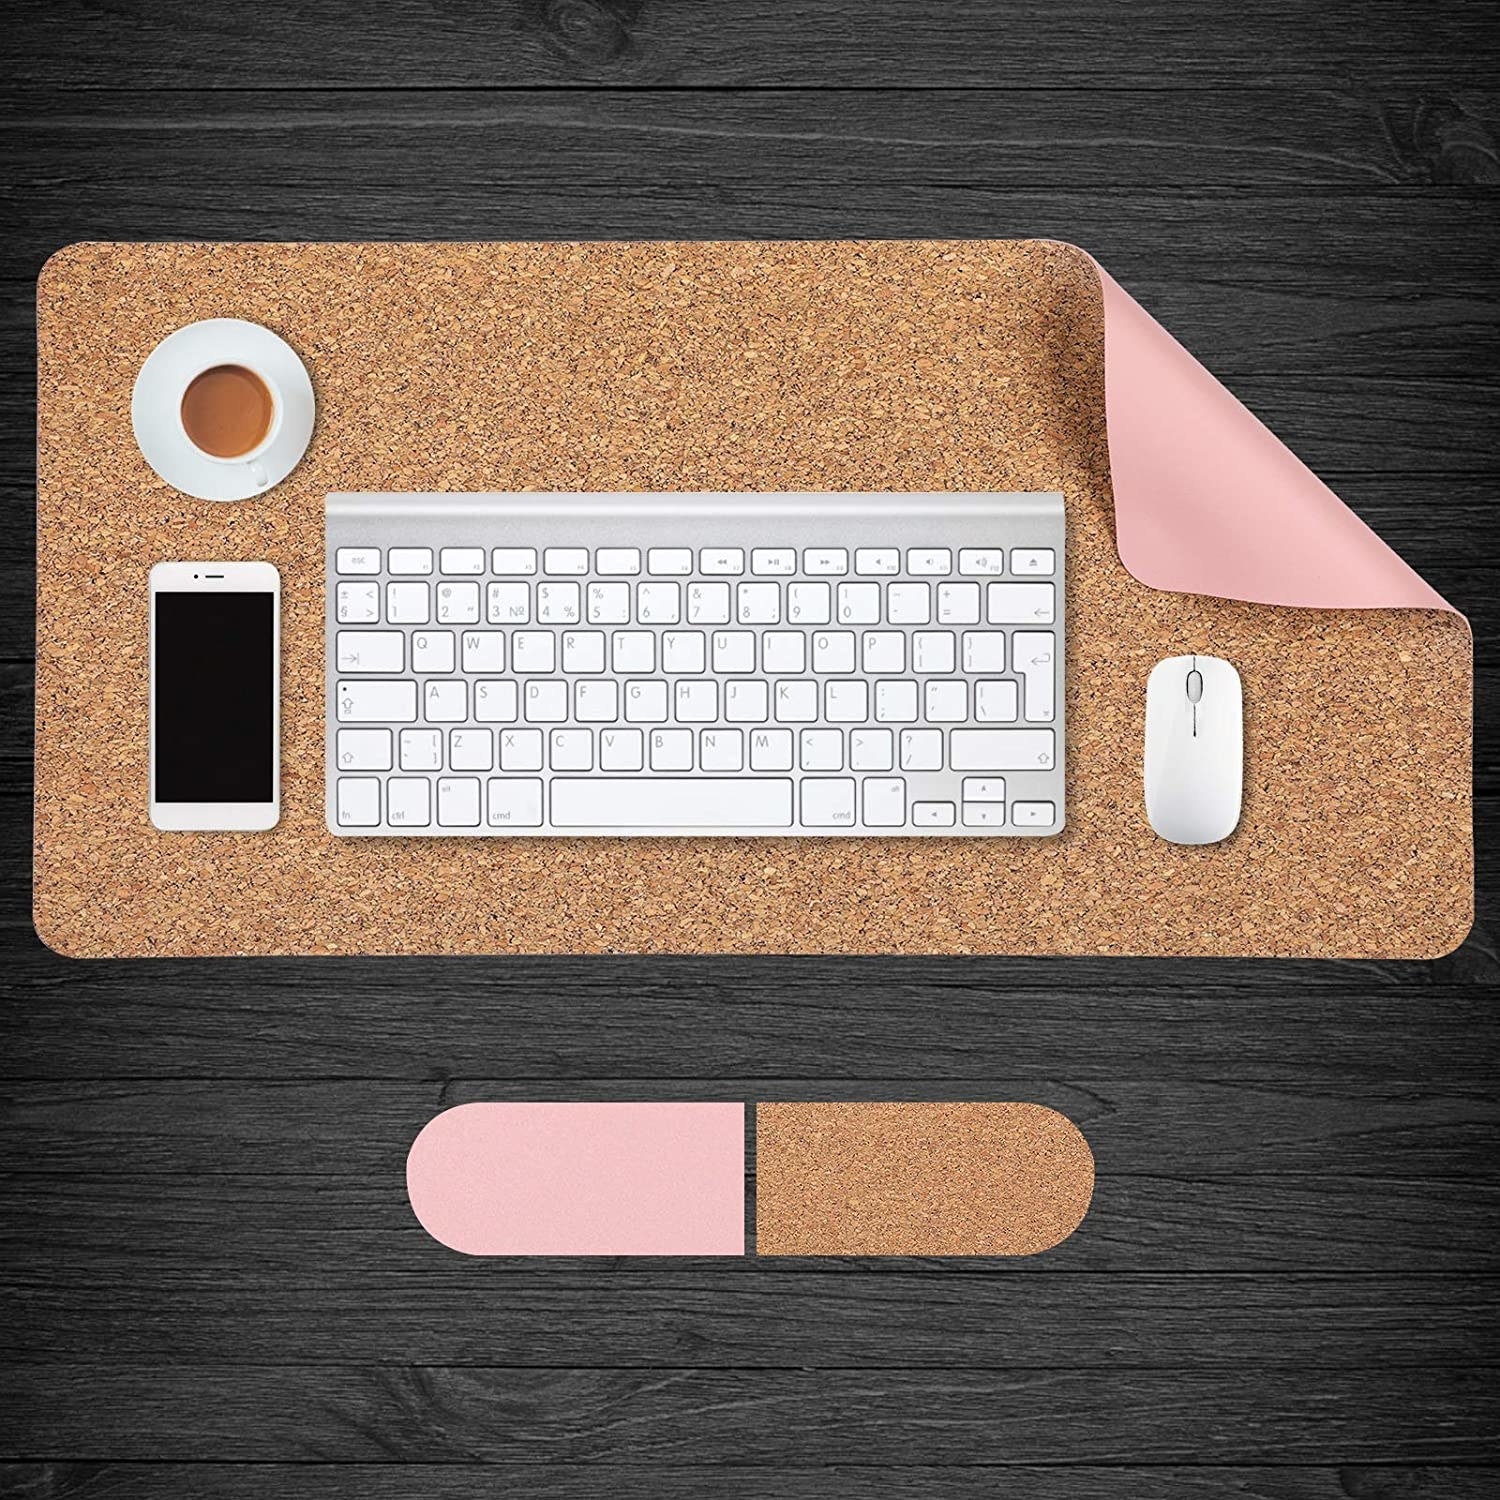 A cork desk mat that&#x27;s curled up to reveal the colourful underside